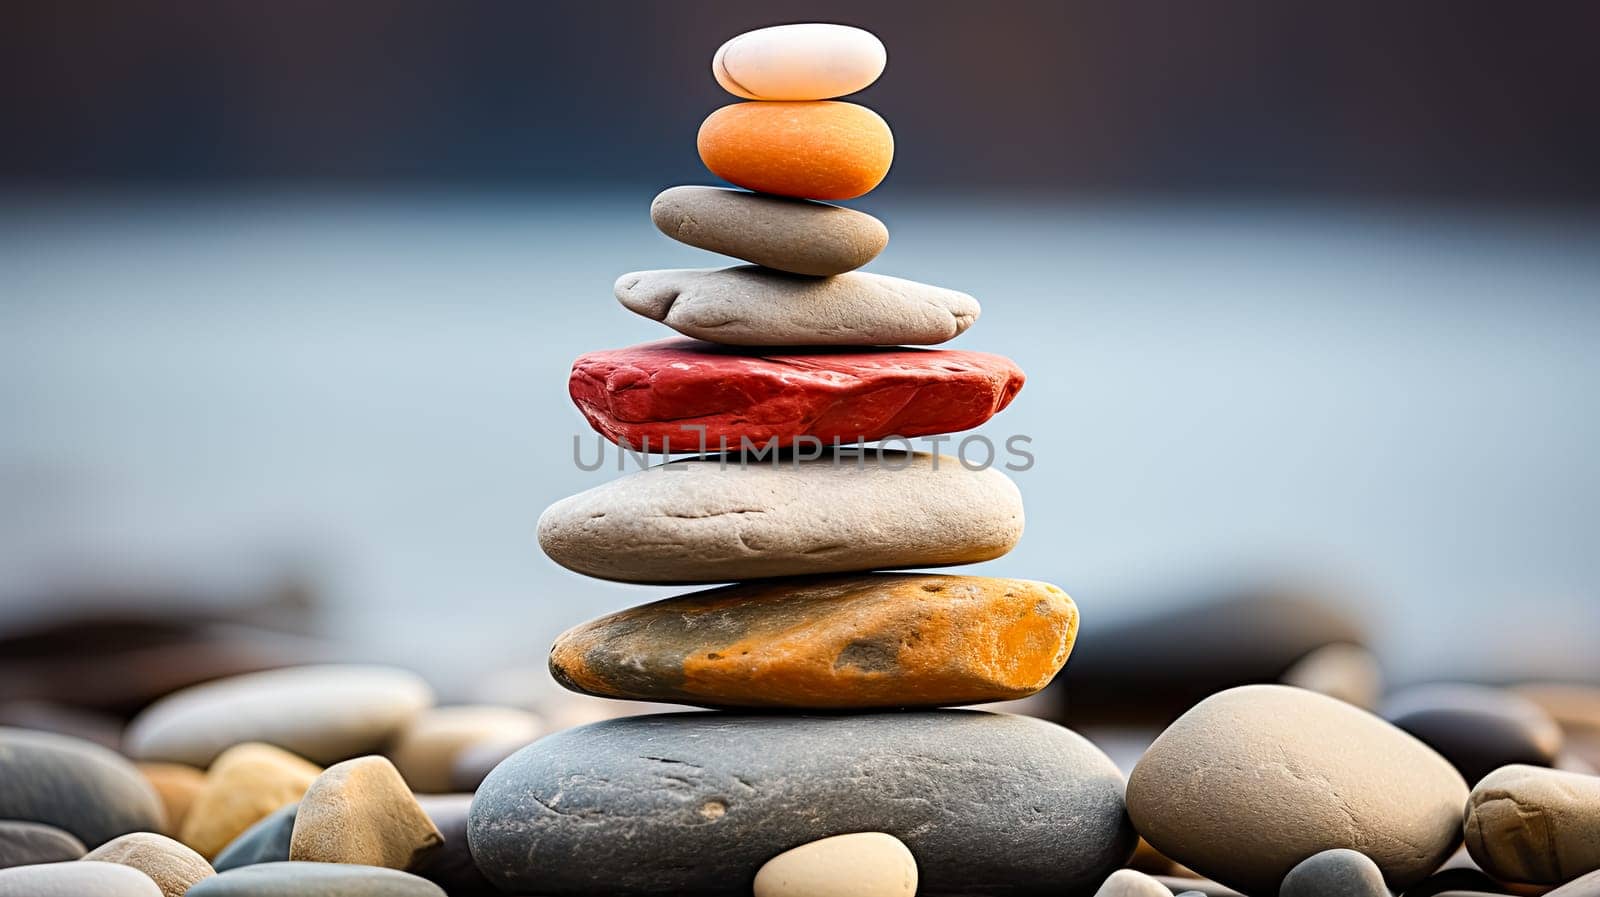 counterbalanced stones set against a calming gray background by Alla_Morozova93